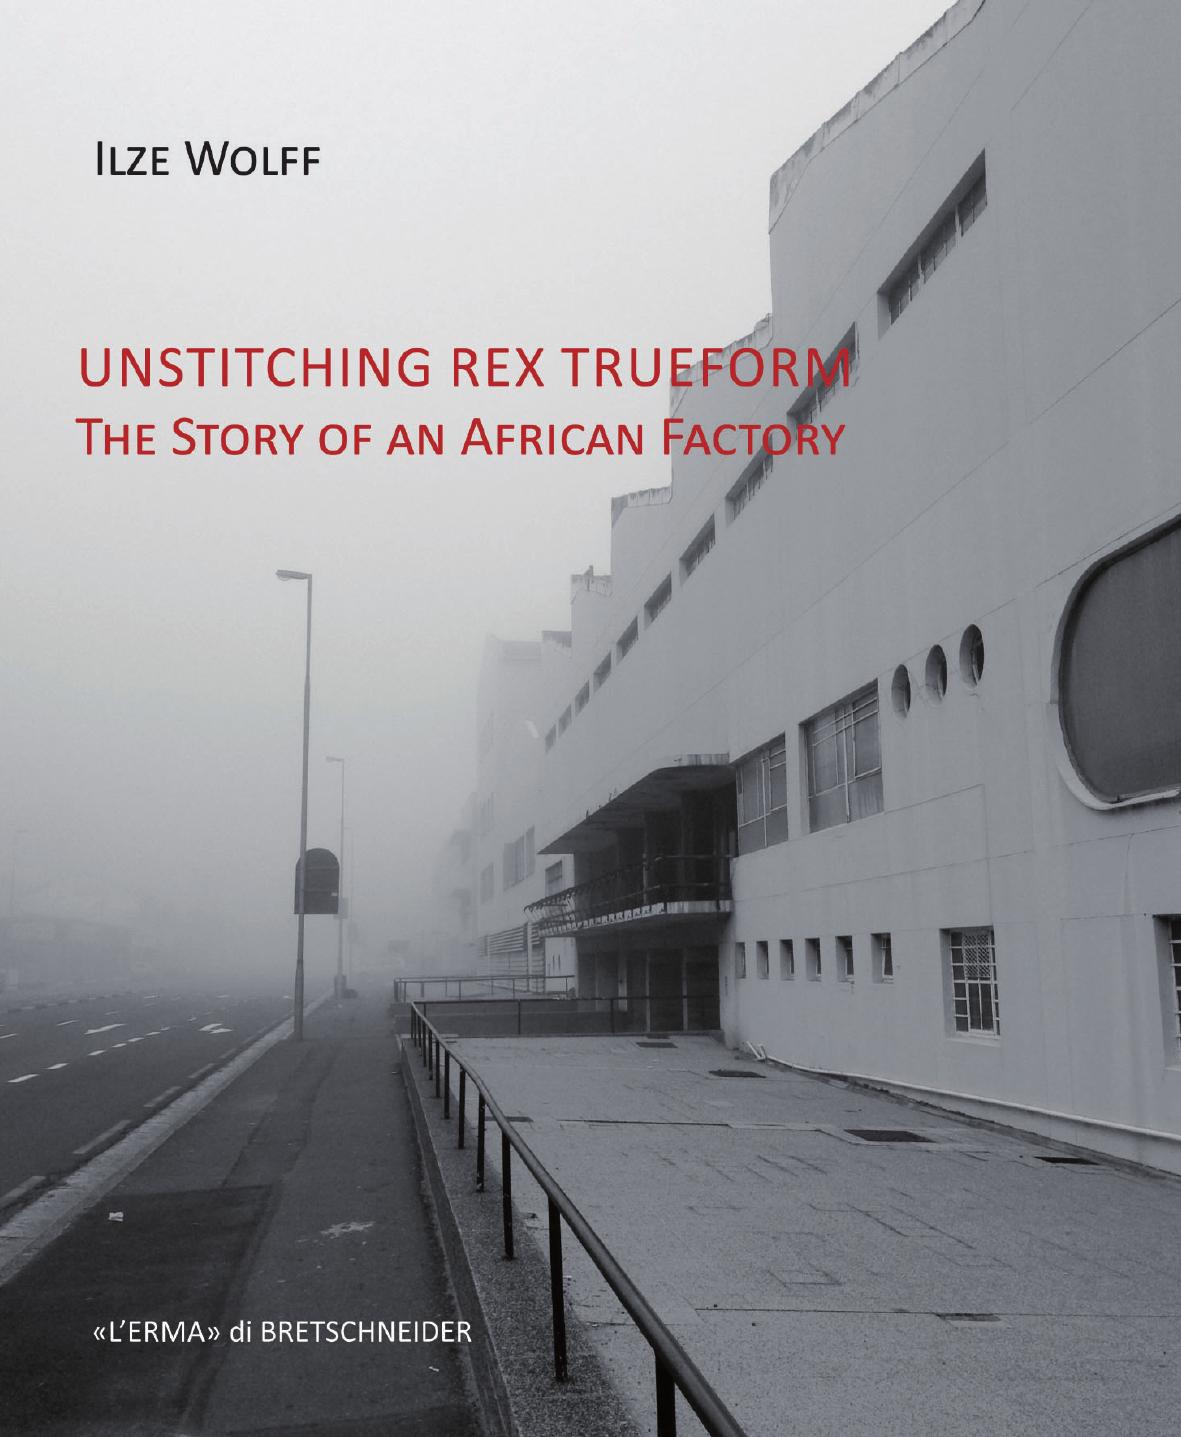 Unstitching Rex Trueform : The Story of an African Factory by Ilze Wolff